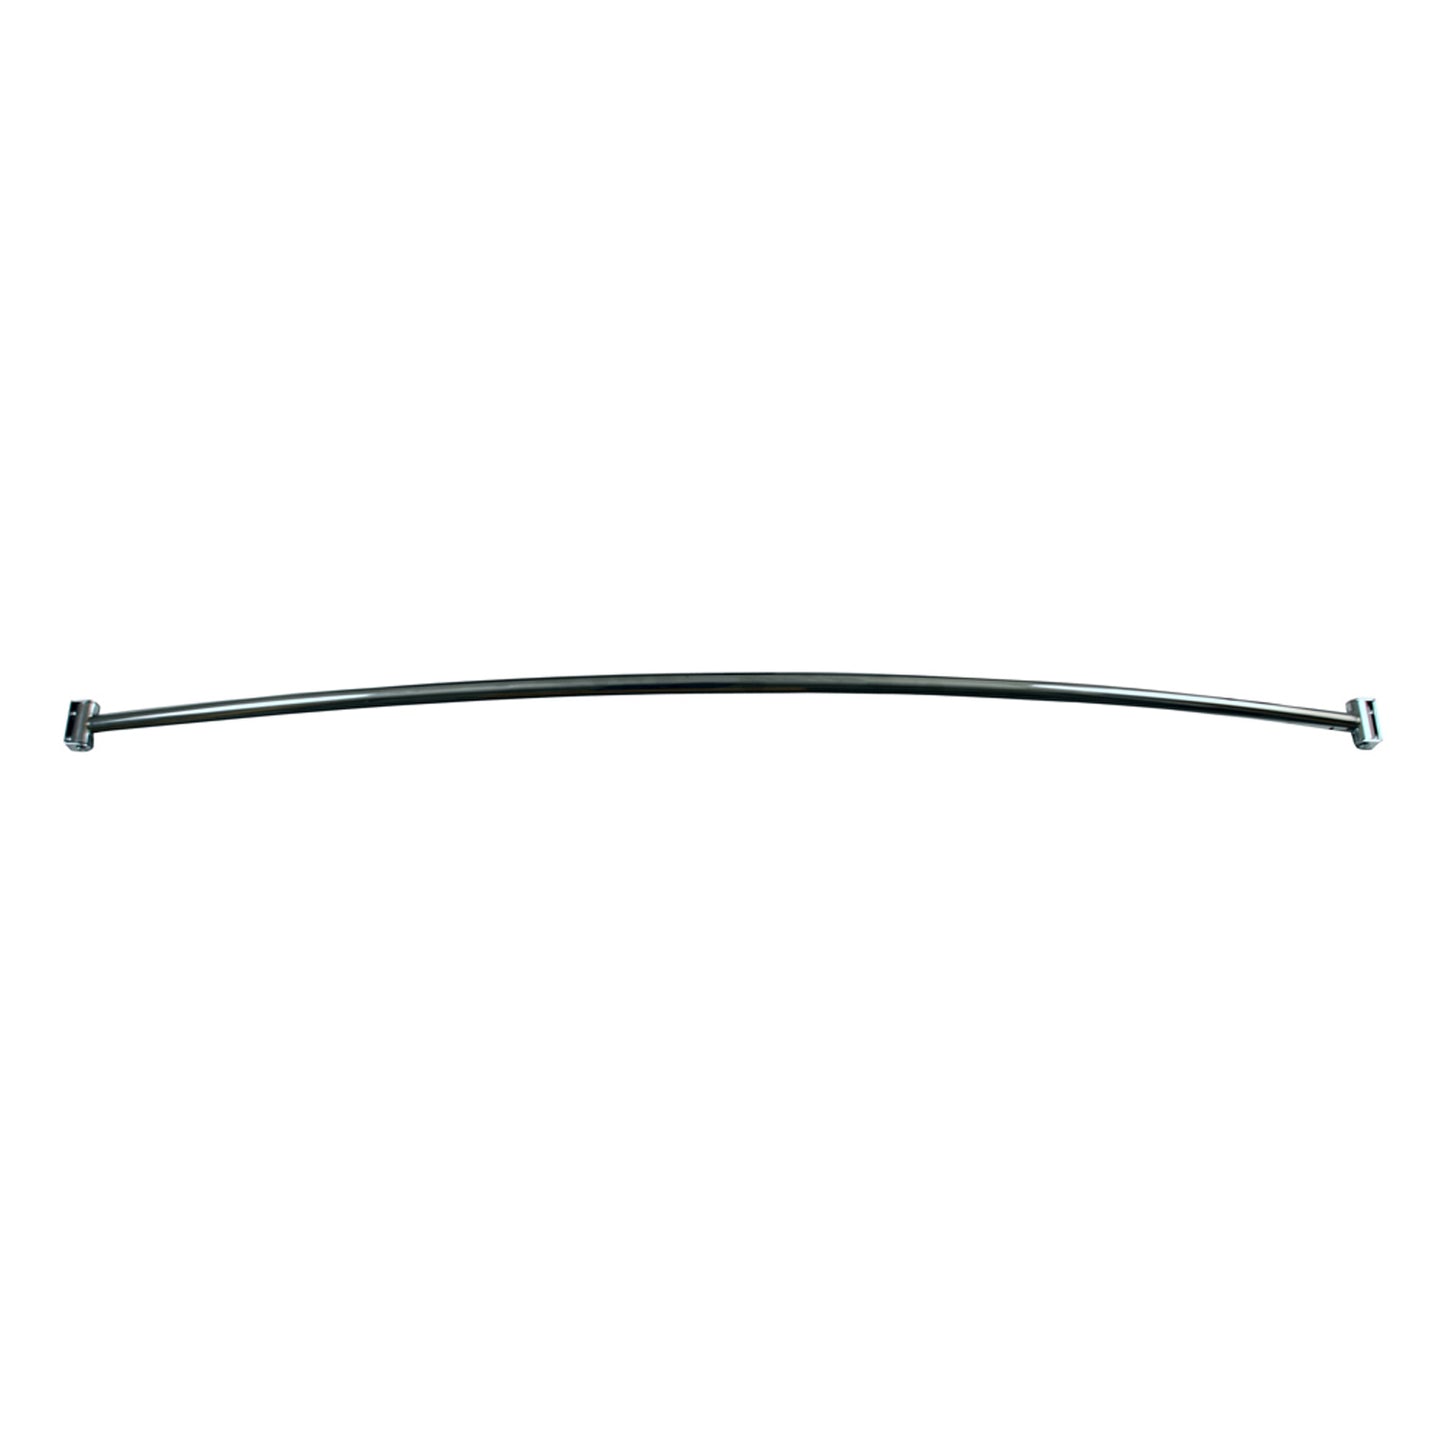 Curved Shower Rod 5-1/2' Steel in Polished Chrome